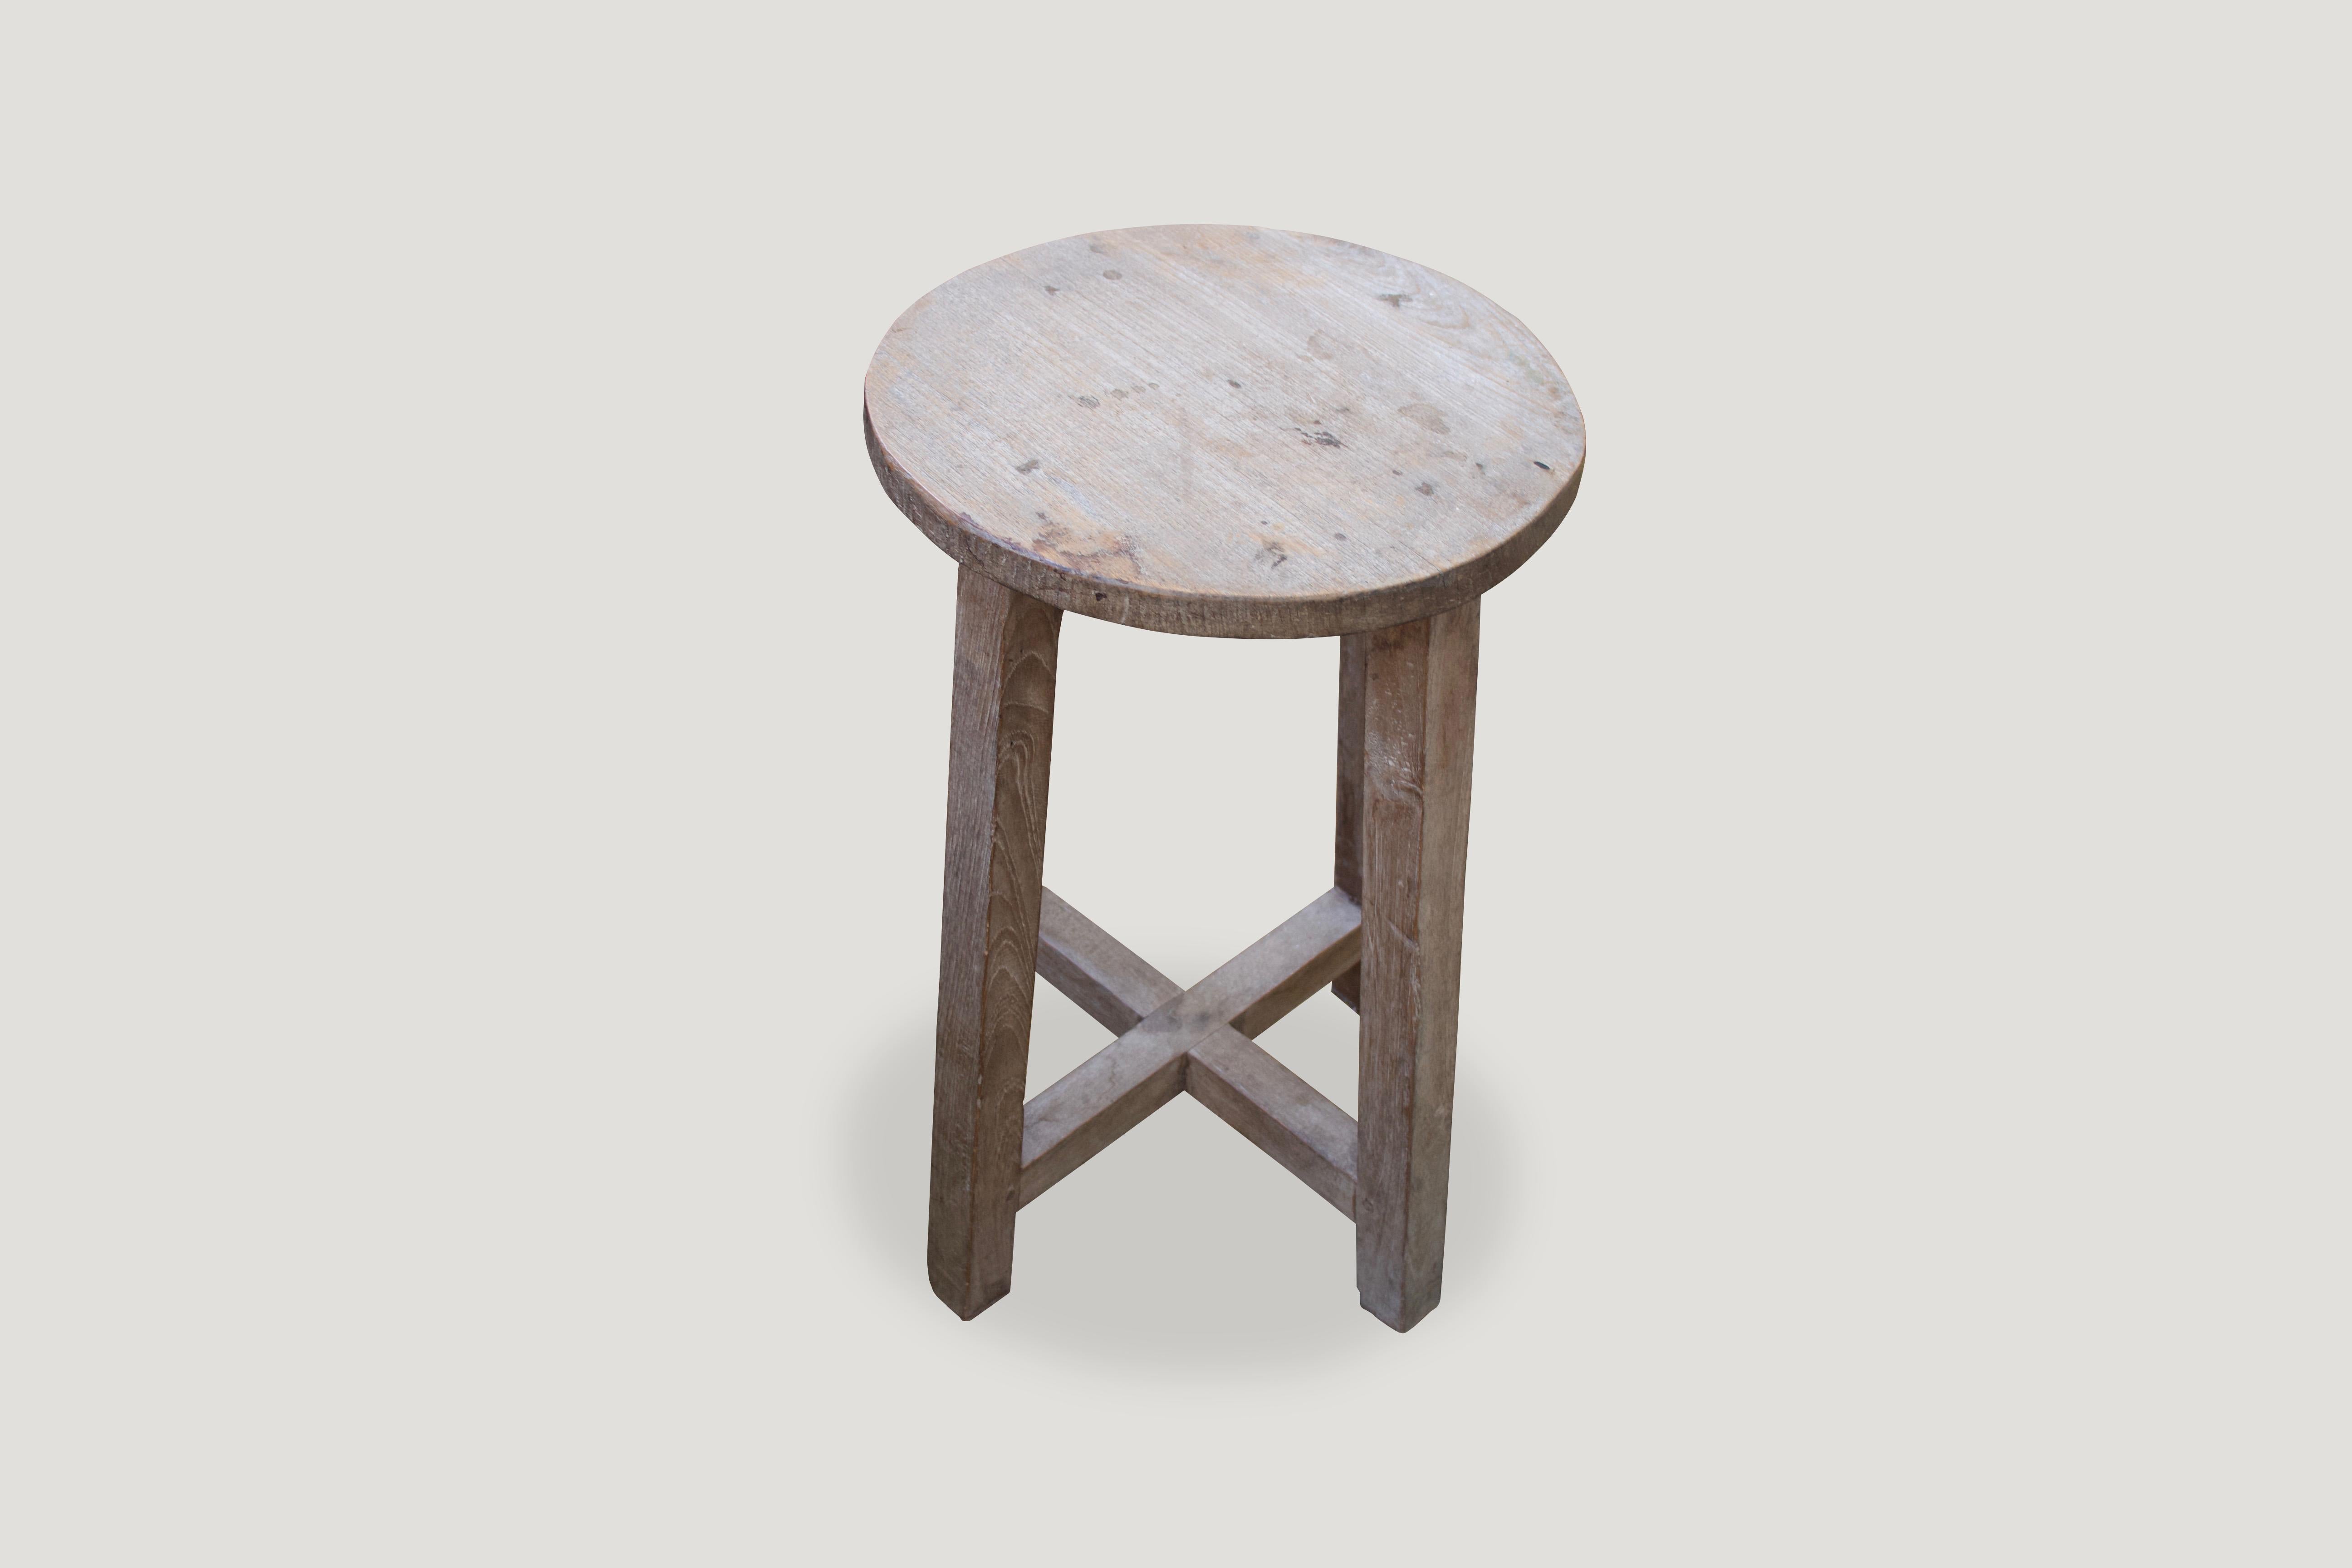 Antique wabi-sabi stool made from teak wood.

This stool was sourced in the spirit of wabi-sabi, a Japanese philosophy that beauty can be found in imperfection and impermanence. It’s a beauty of things modest and humble. It’s a beauty of things